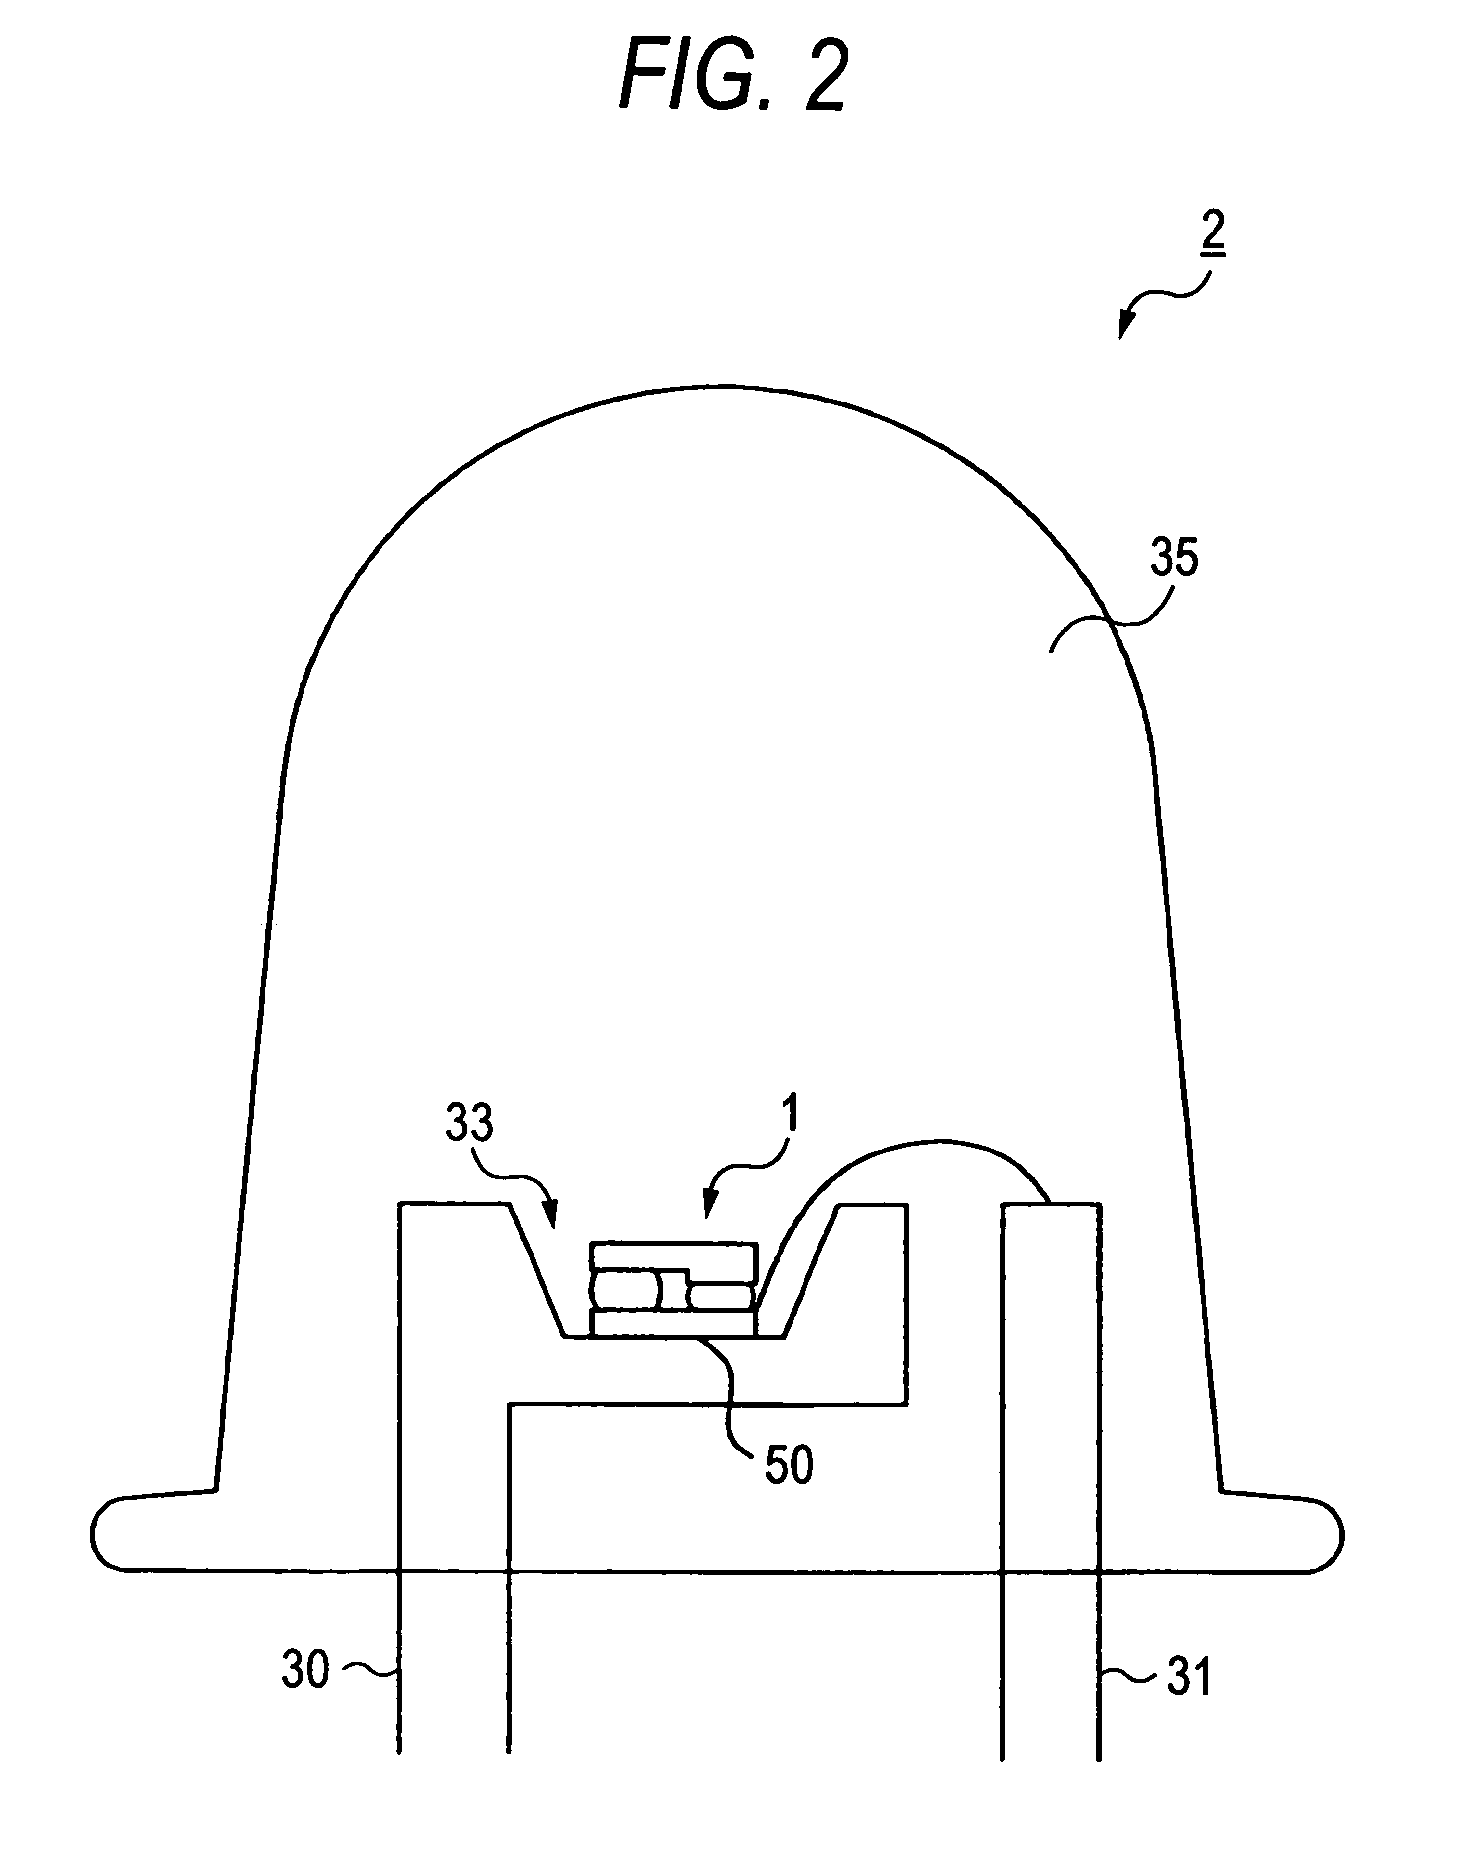 Group III nitride based semiconductor luminescent element